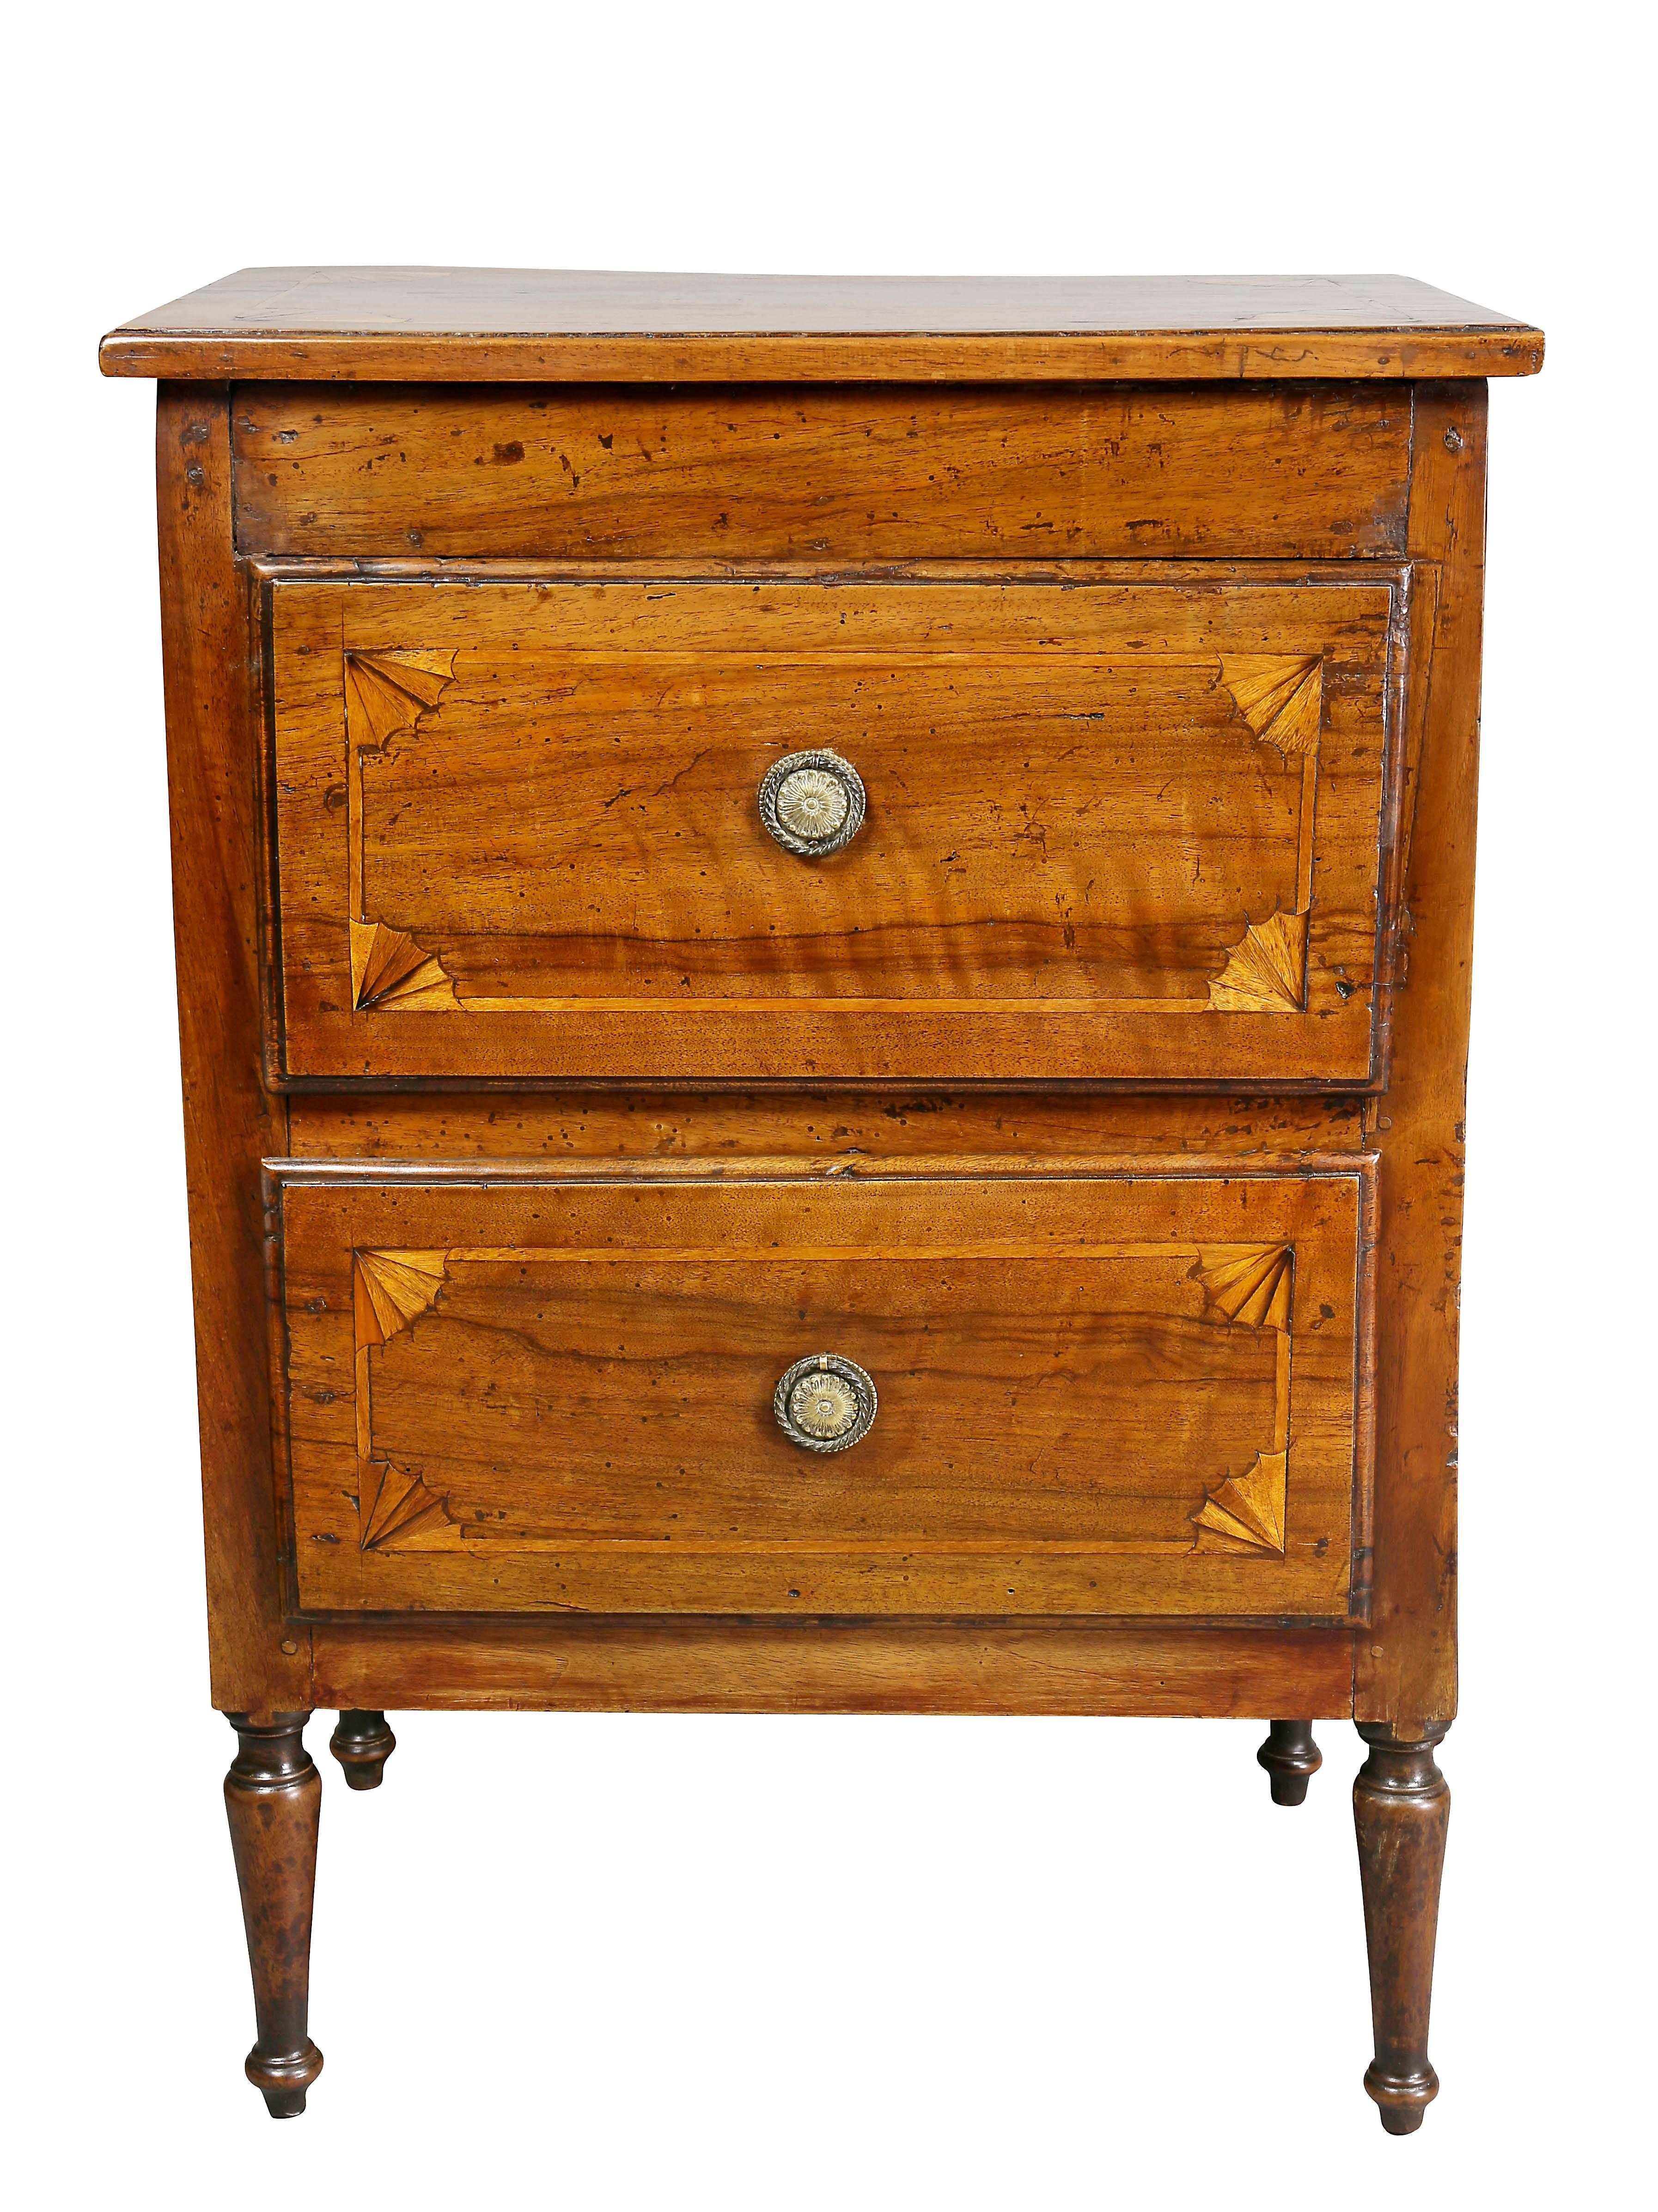 With rectangular inlaid top over two drawers raised on circular tapered legs.